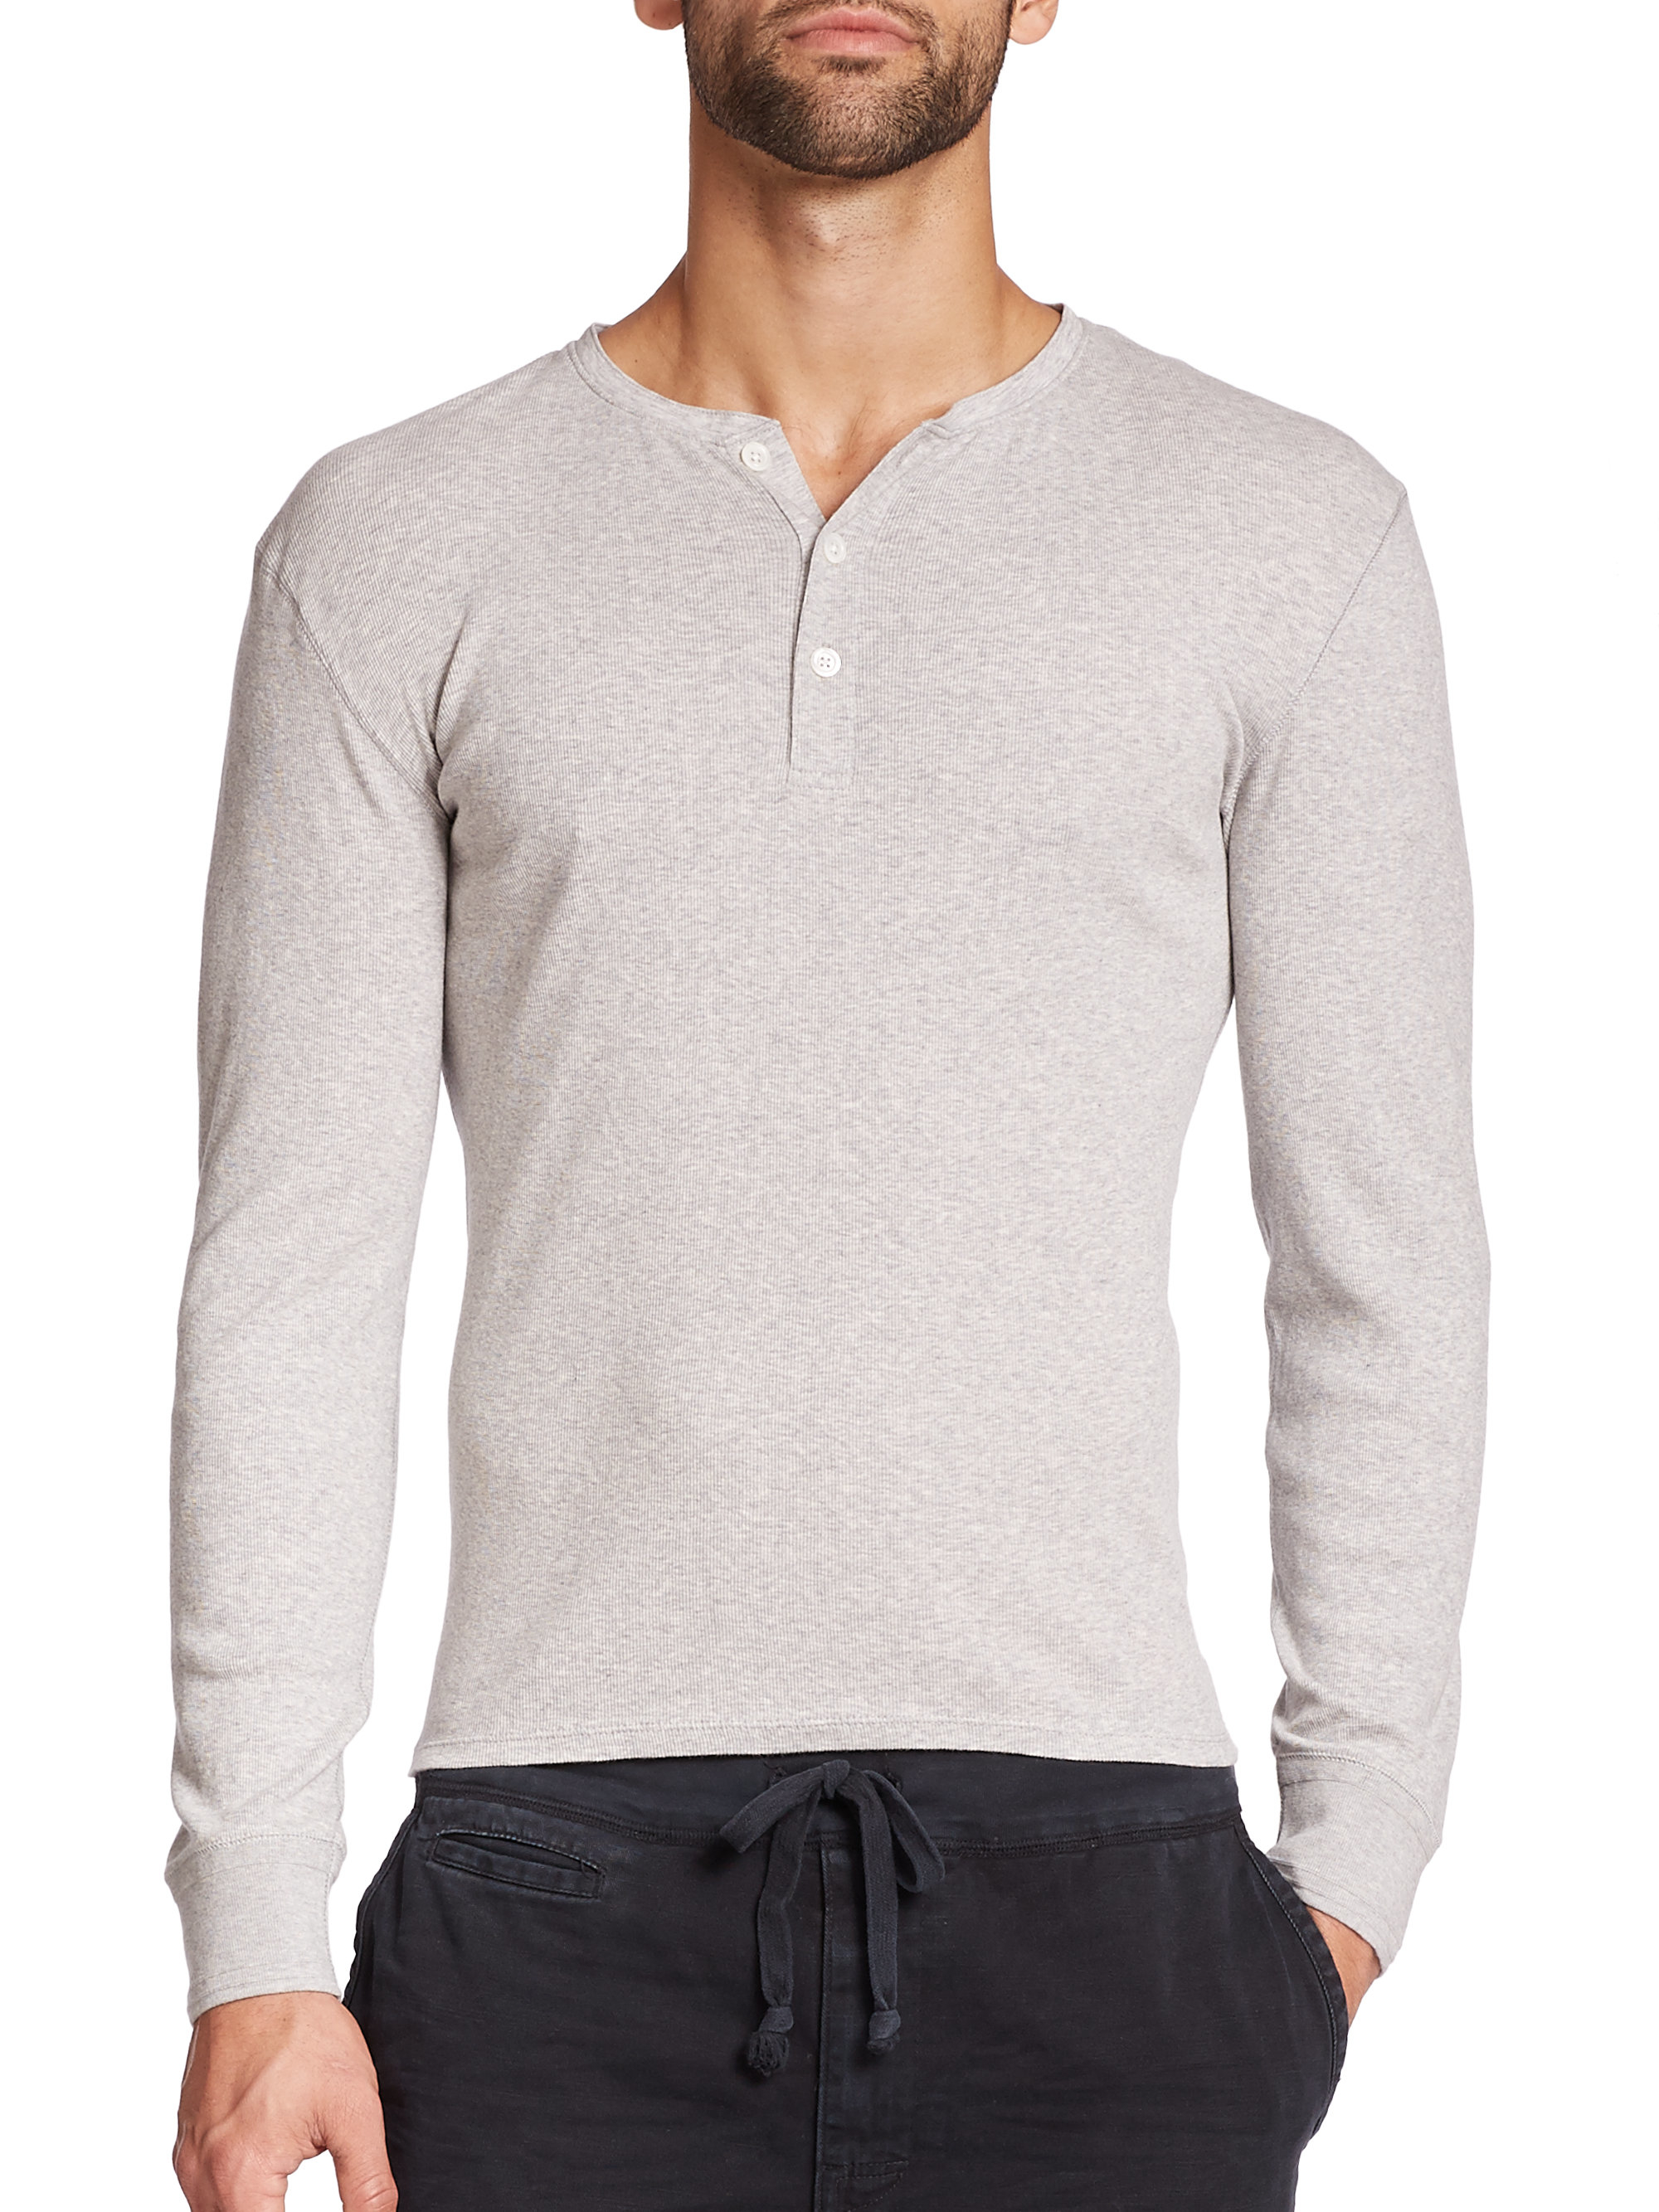 Lyst - Polo Ralph Lauren Ribbed Cotton Henley in Gray for Men